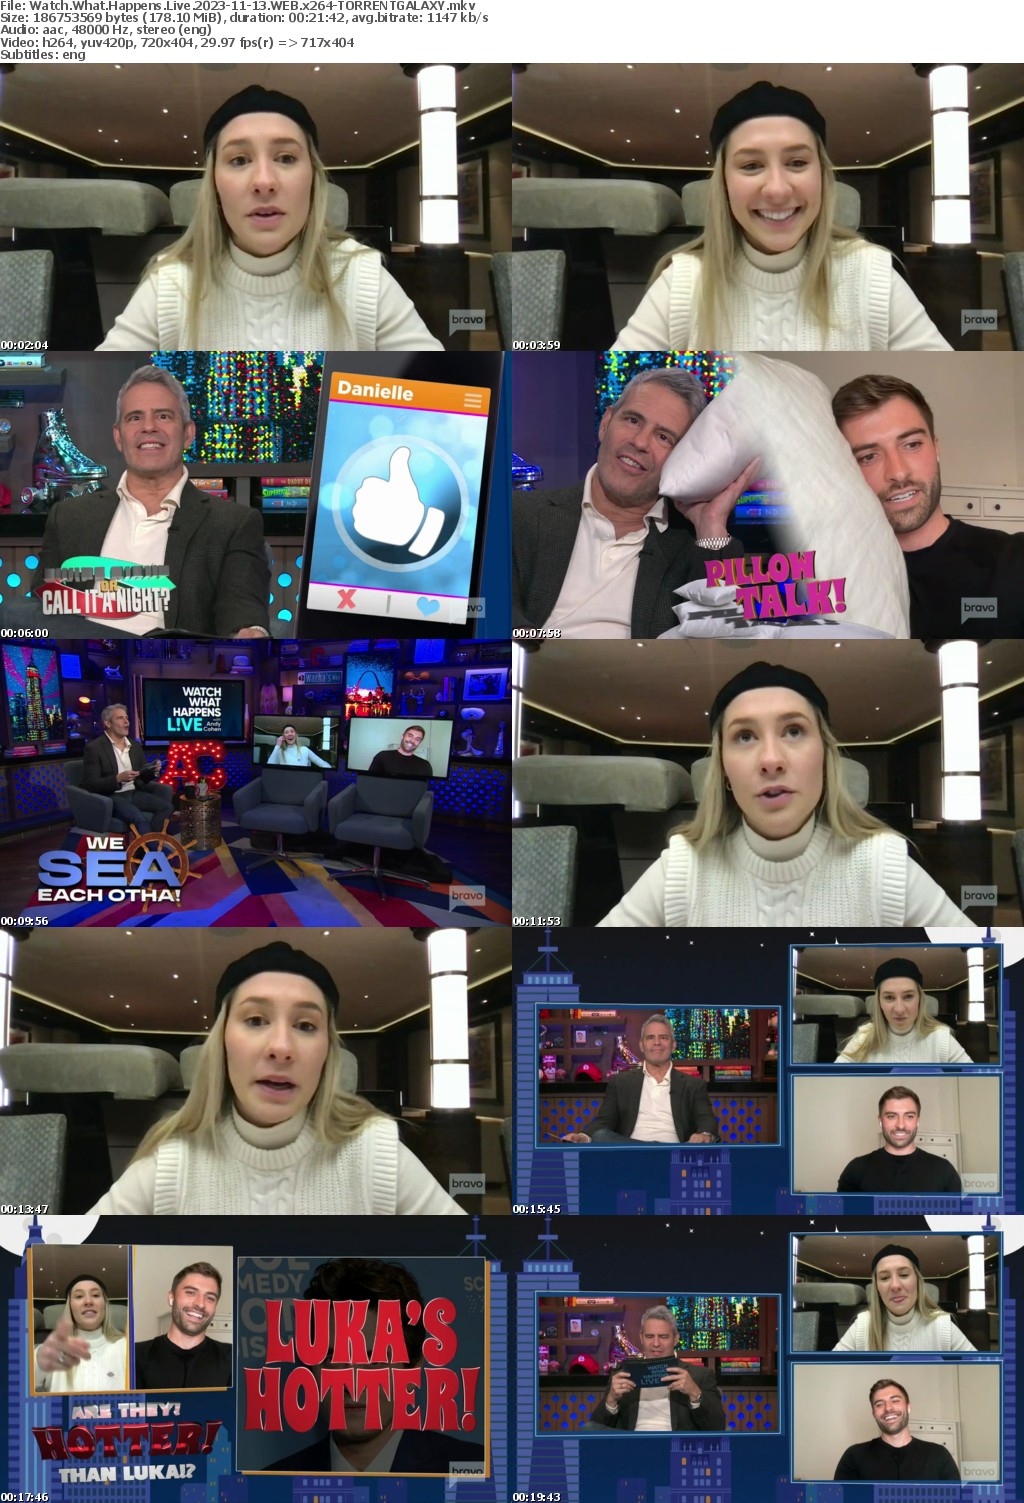 Watch What Happens Live 2023-11-13 WEB x264-GALAXY